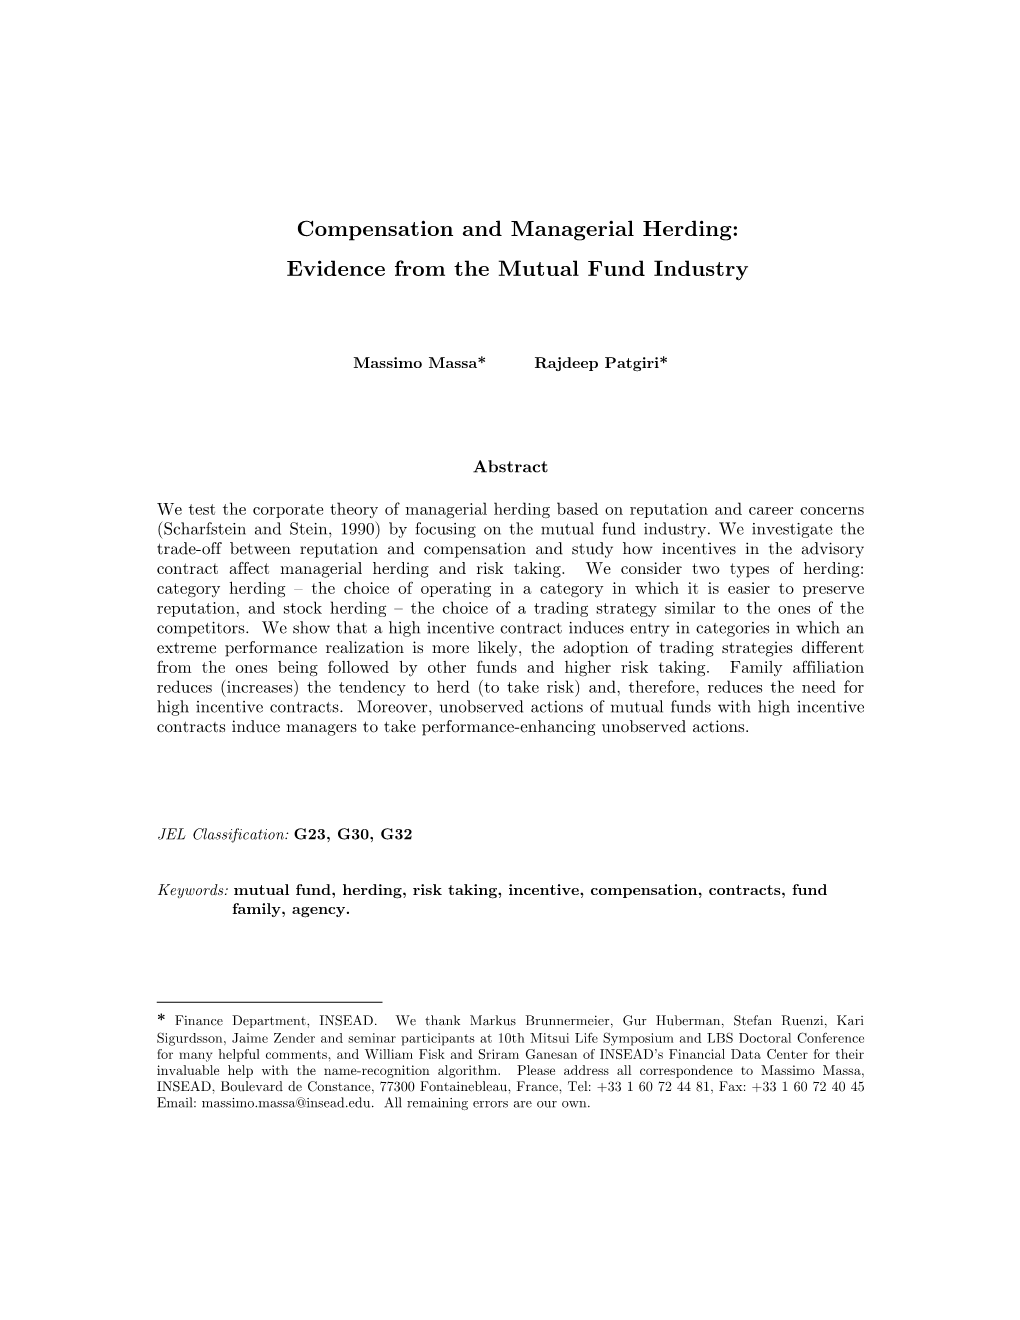 Compensation and Managerial Herding: Evidence from the Mutual Fund Industry